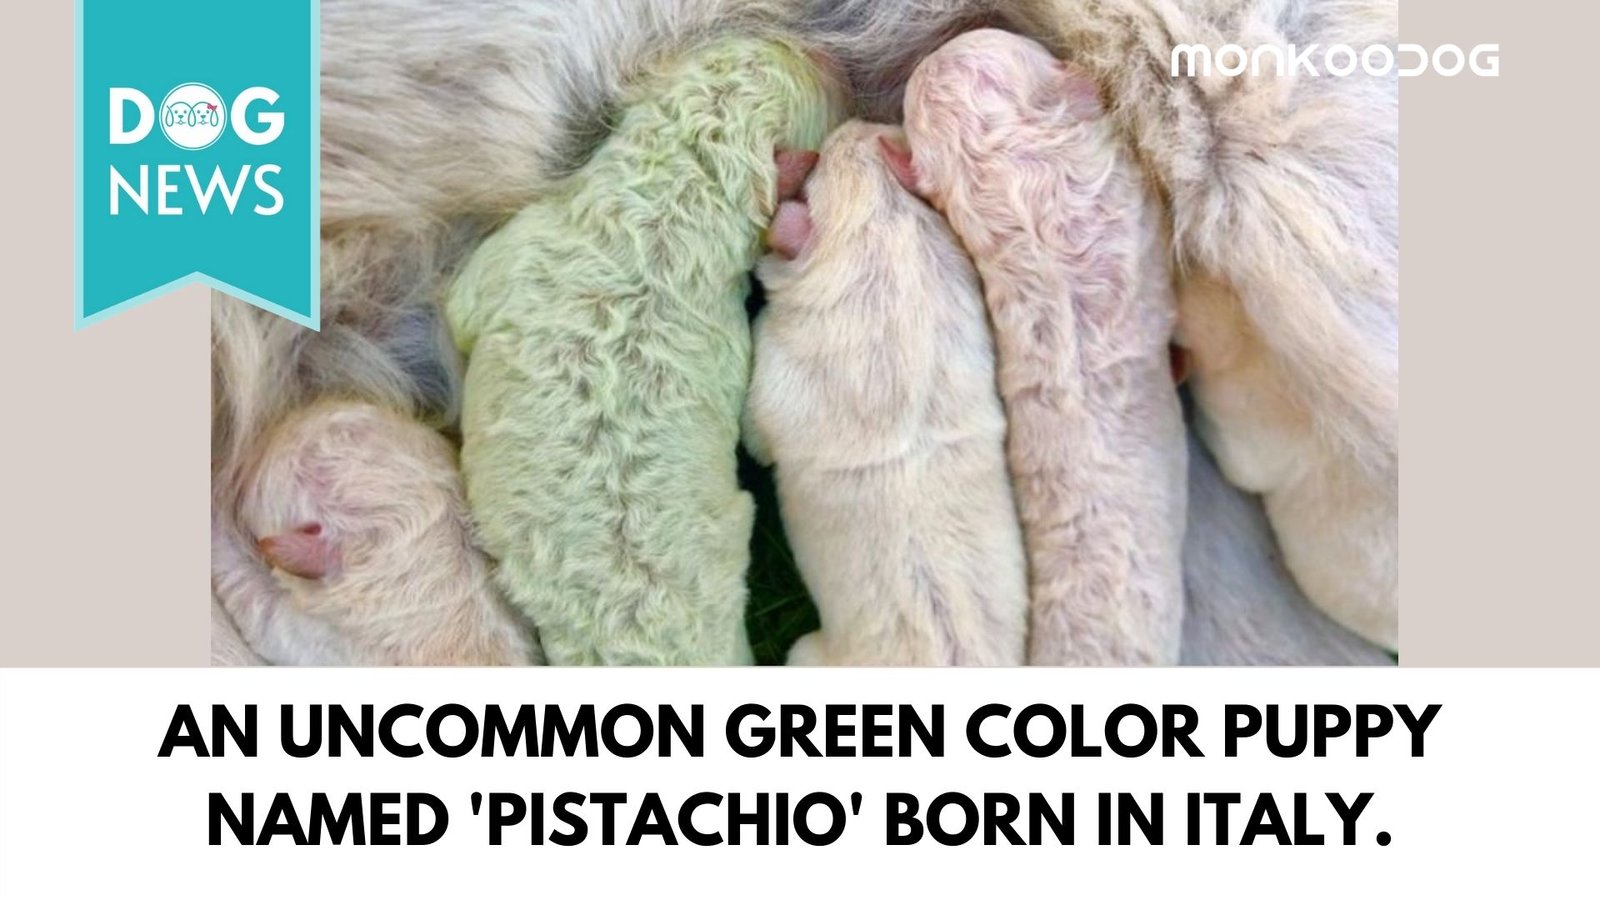 An uncommon green color puppy named 'Pistachio' born in Italy.